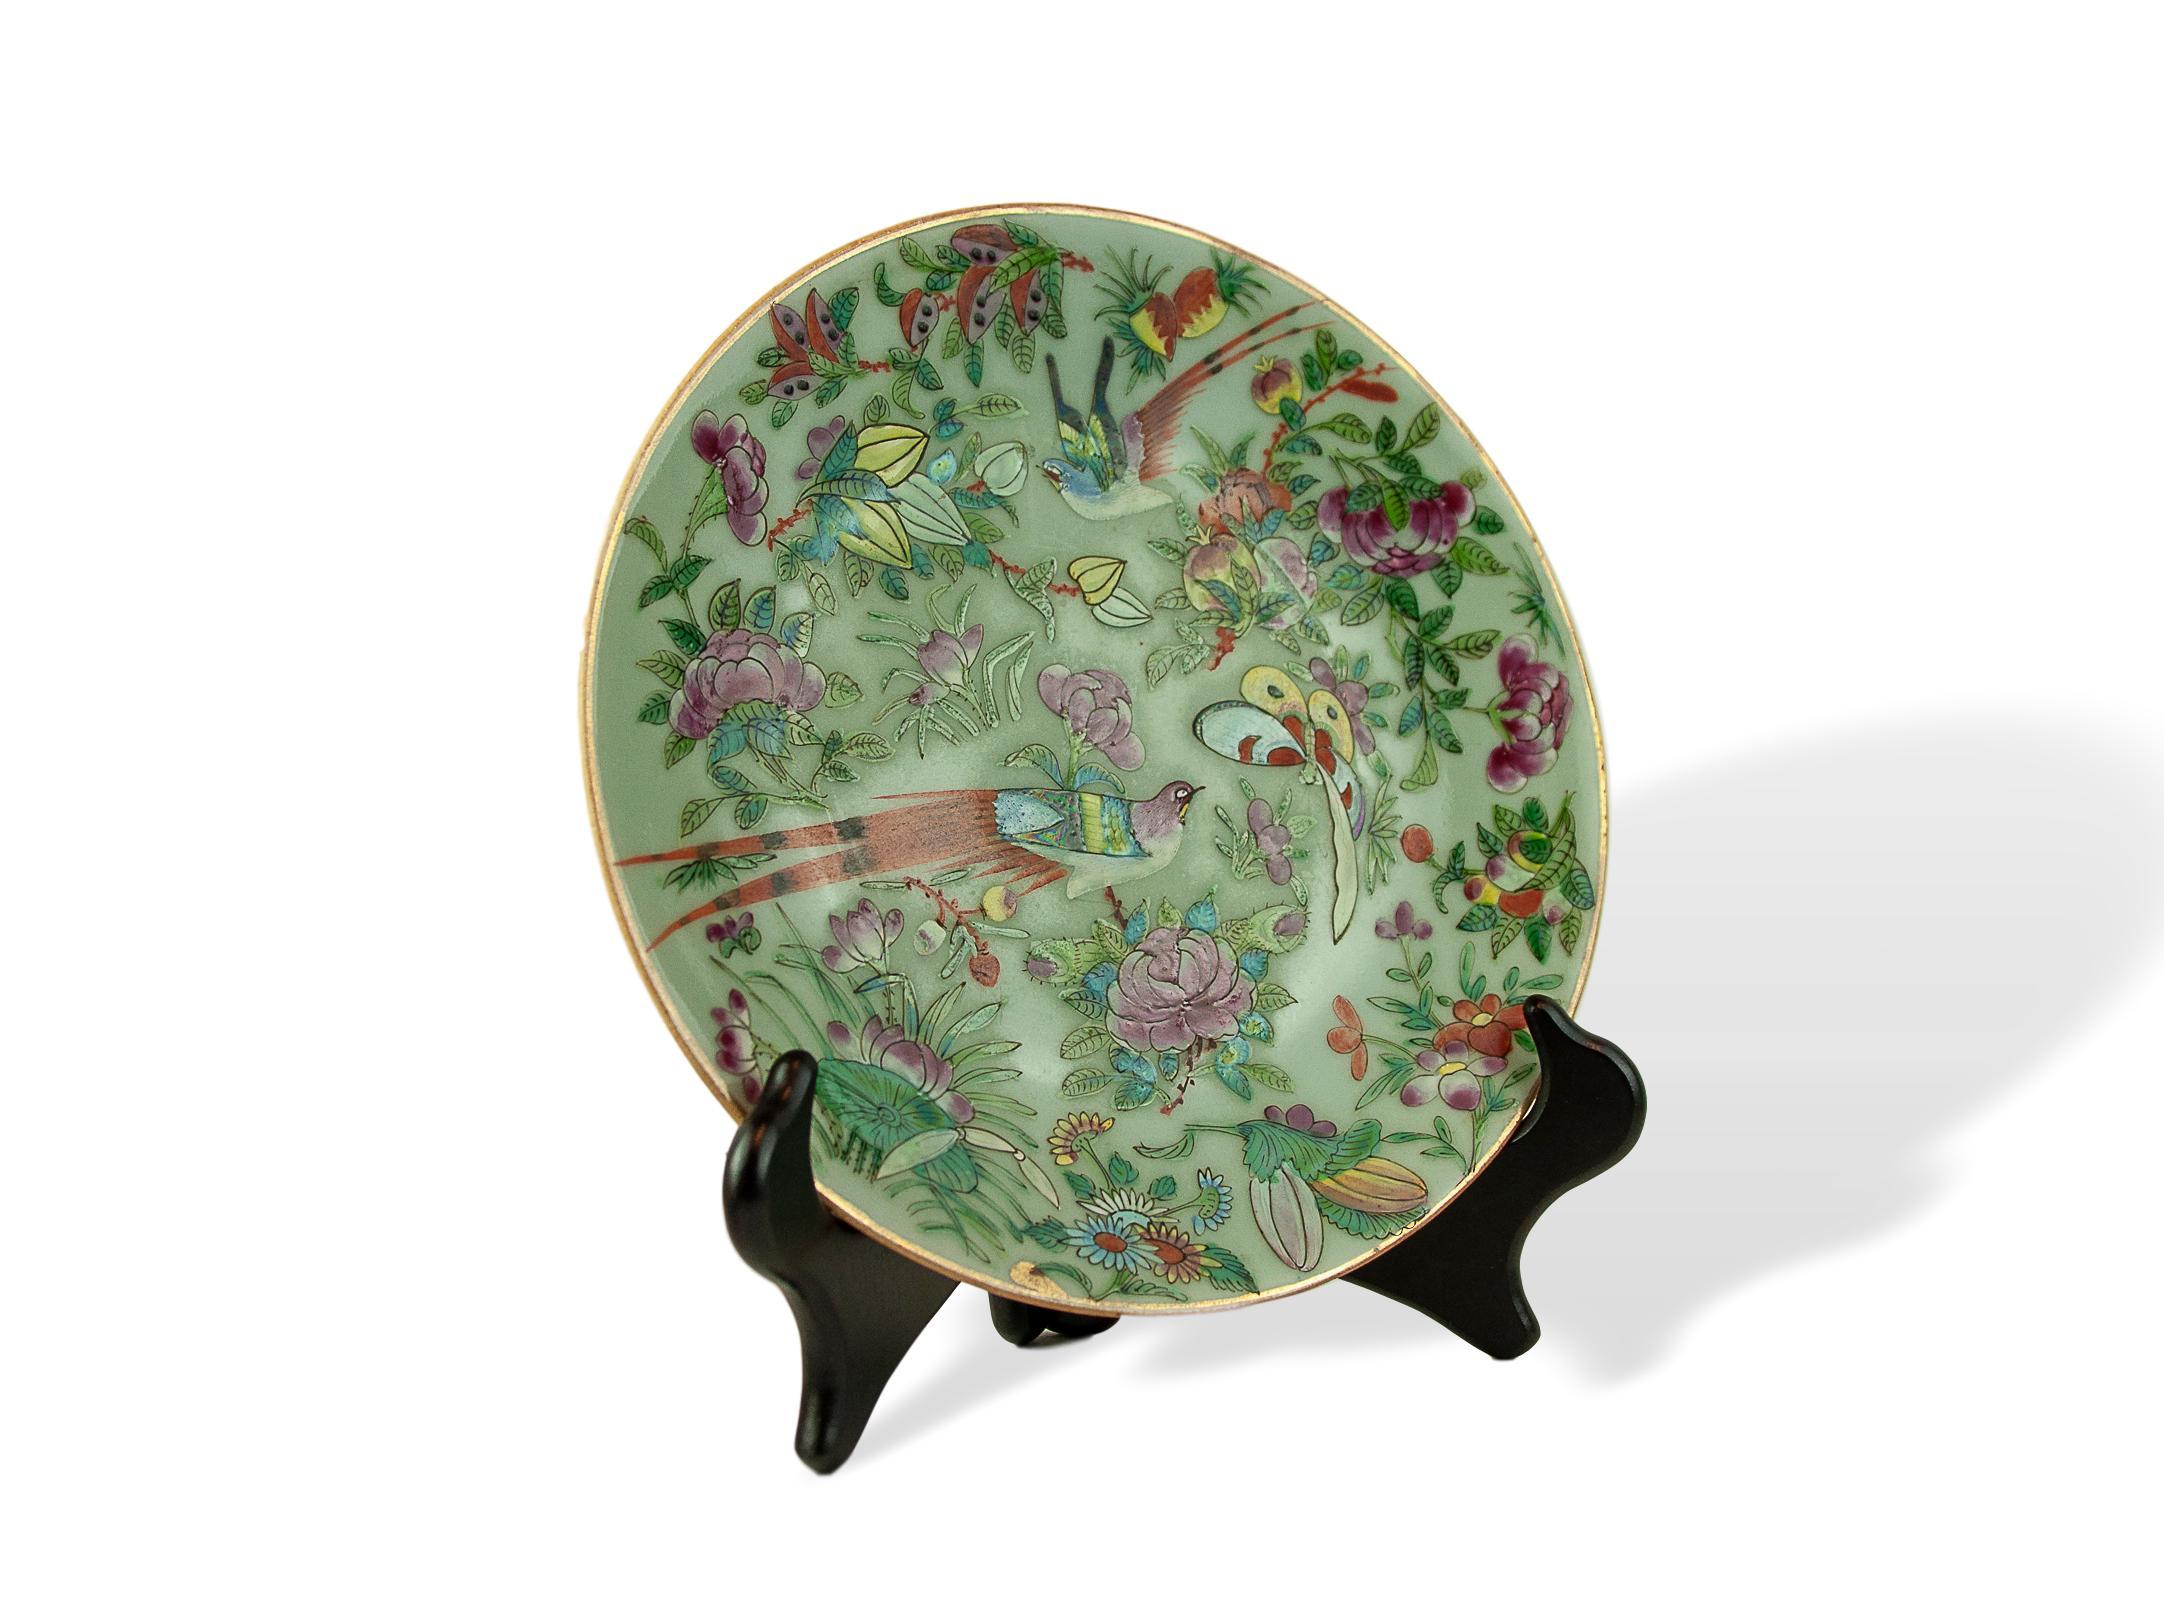 Chinese Export Chinese Celadon Famille Rose Plate, Canton, circa 1820